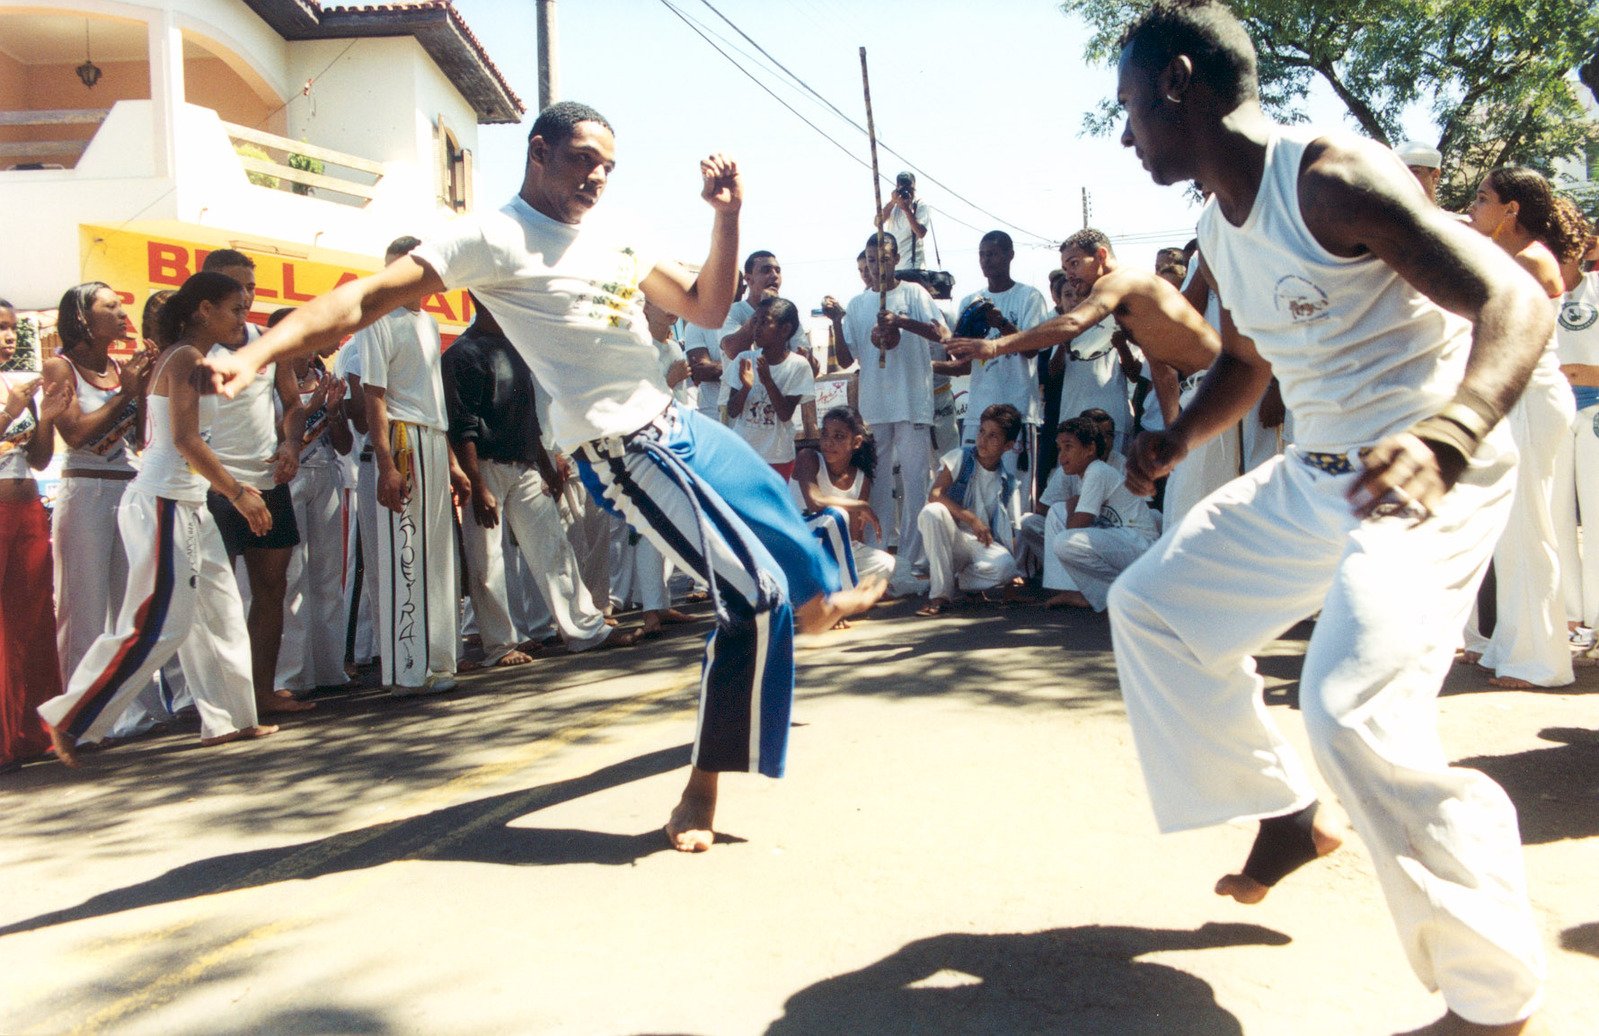 two young men perform a street dance during a festival